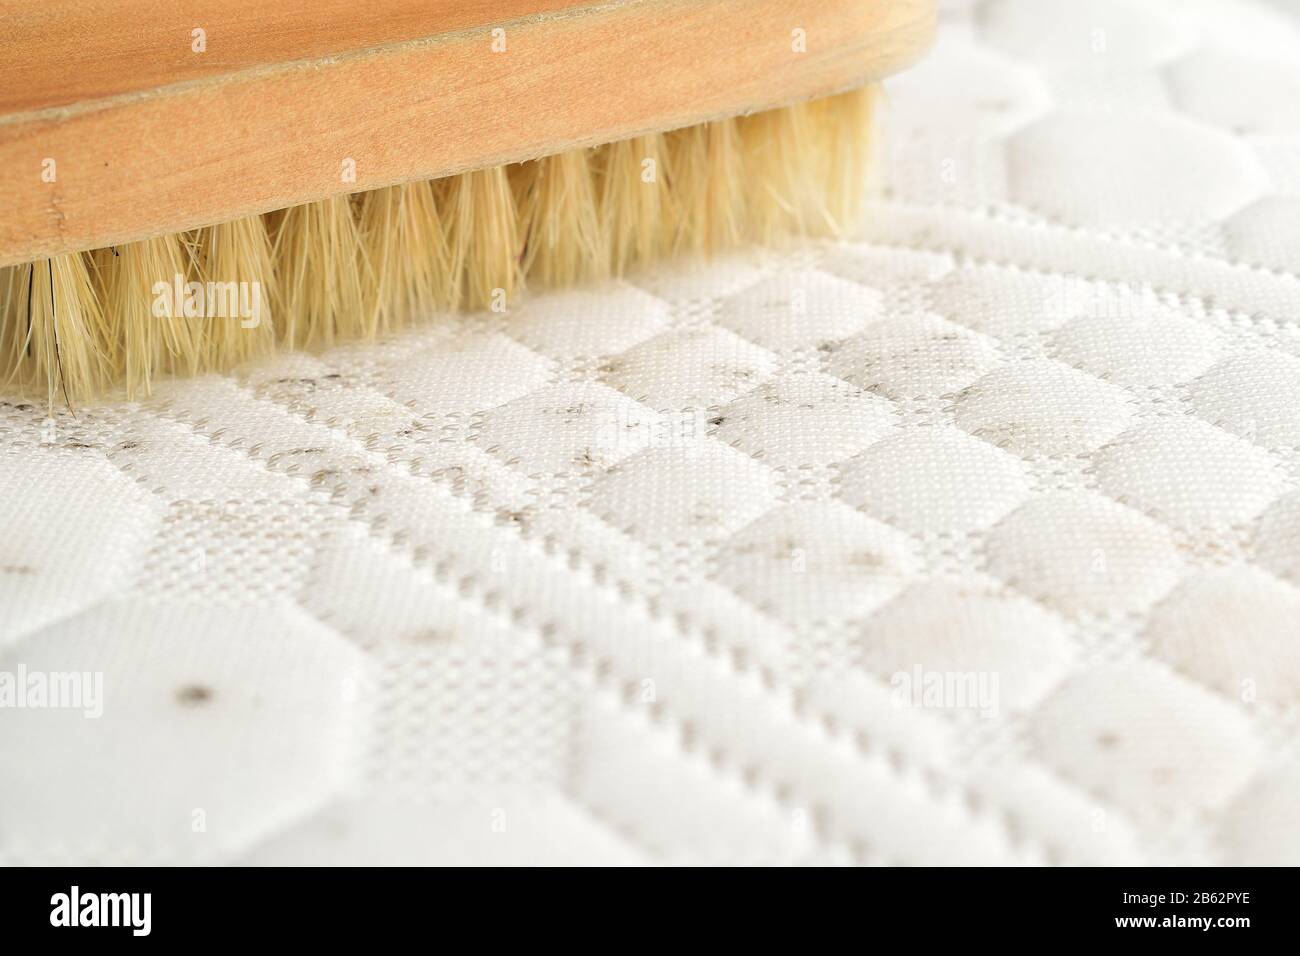 removing stains from mattress top